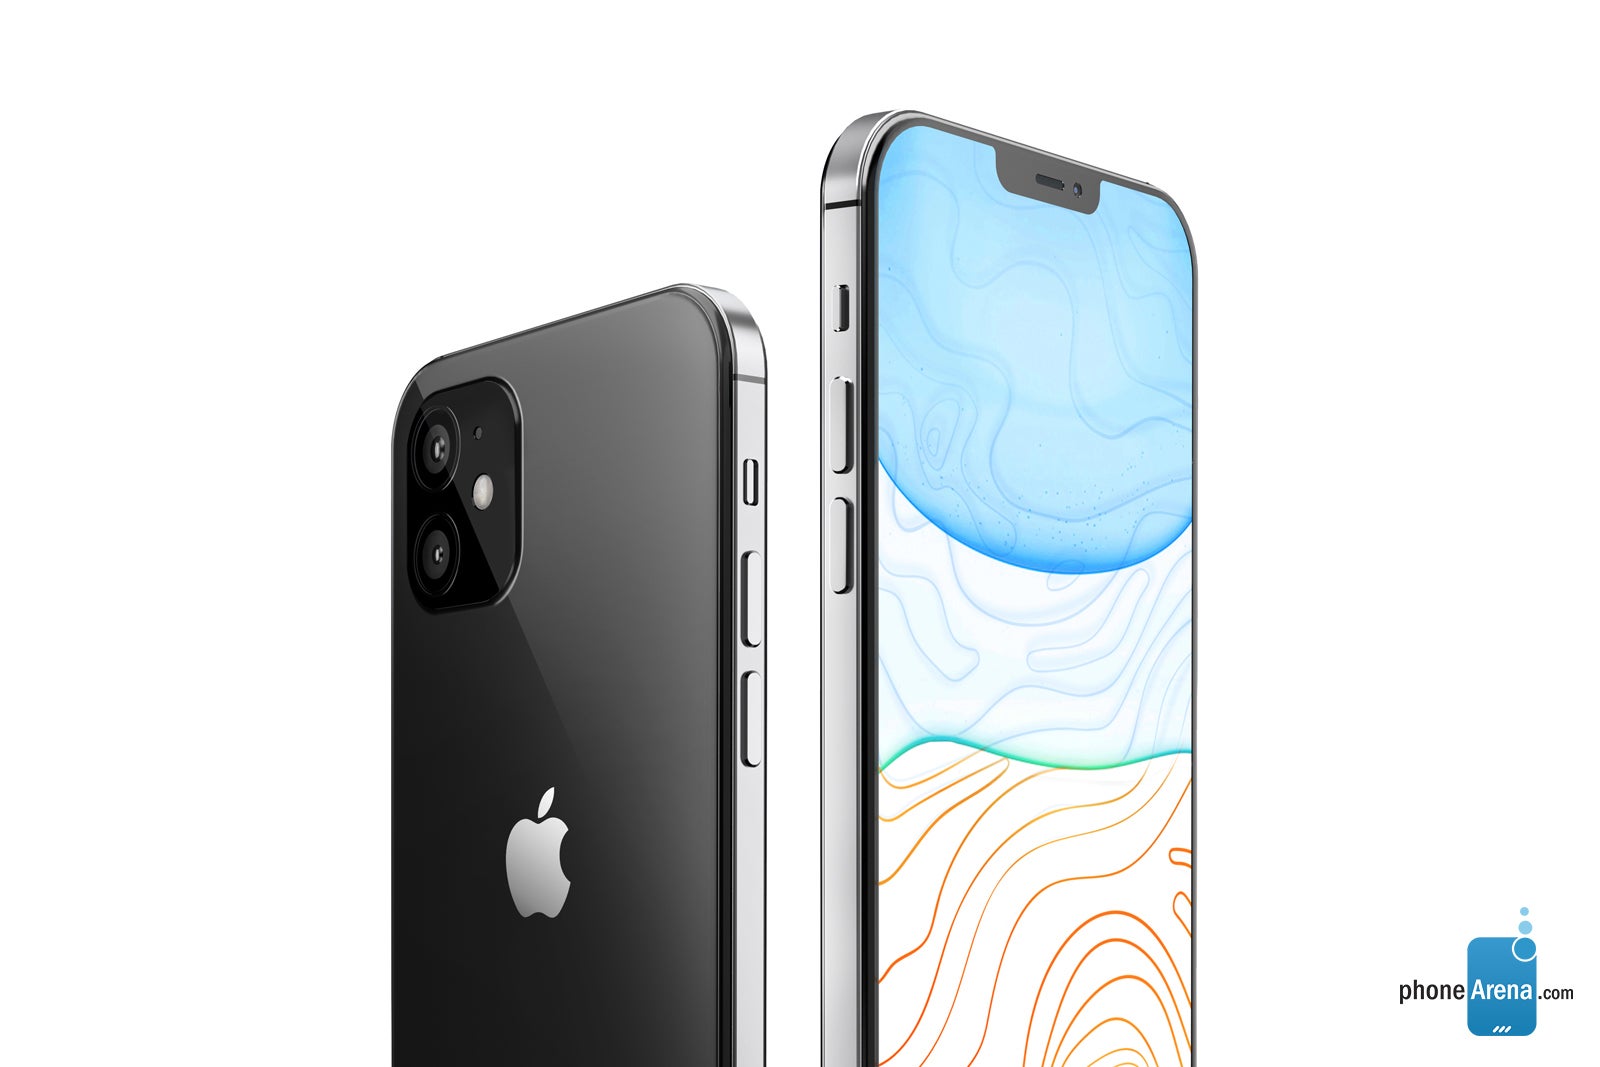 Apple iPhone 12 concept render - Apple iPhone 12 Max & 12 Pro to enter production in July; other 5G models to follow